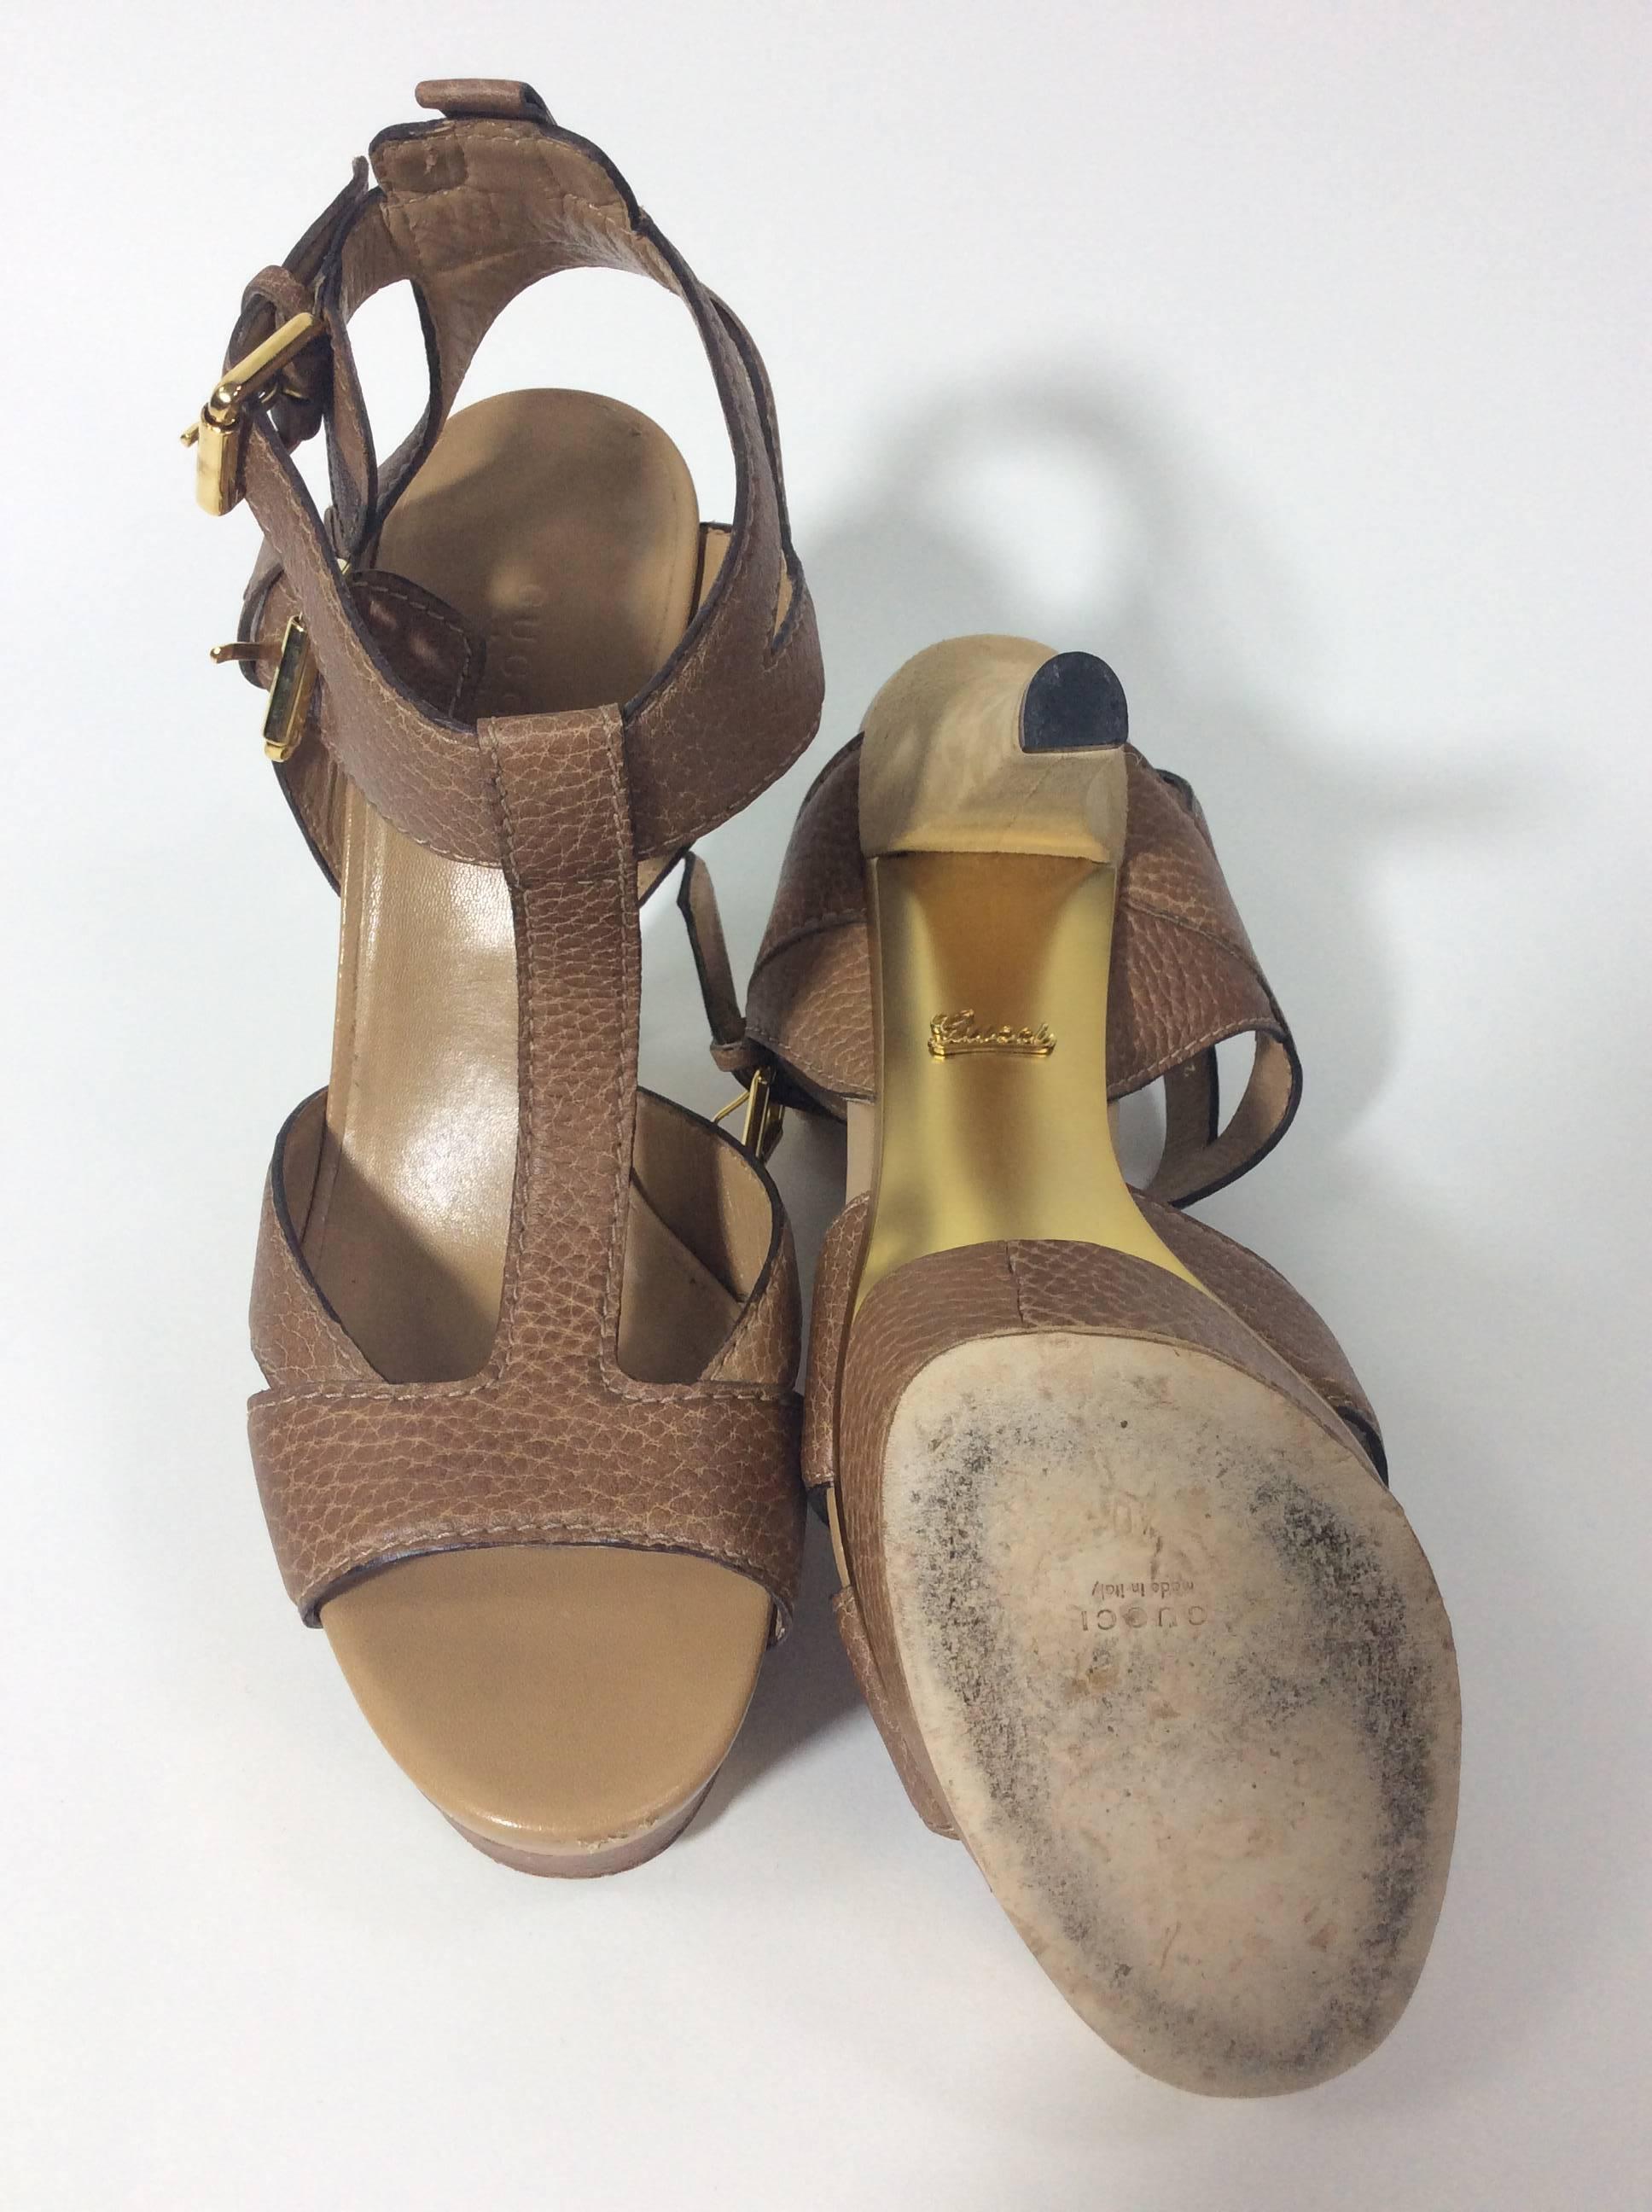 Tan Platform Strap Sandals
5 inch heel with a 1.5 inch platform
Buckle closures on outside of ankle
T-strap style sandal with cross strap details
Size 40 (equates to US 9)
Leather sole, suede heel, leather upper and lining